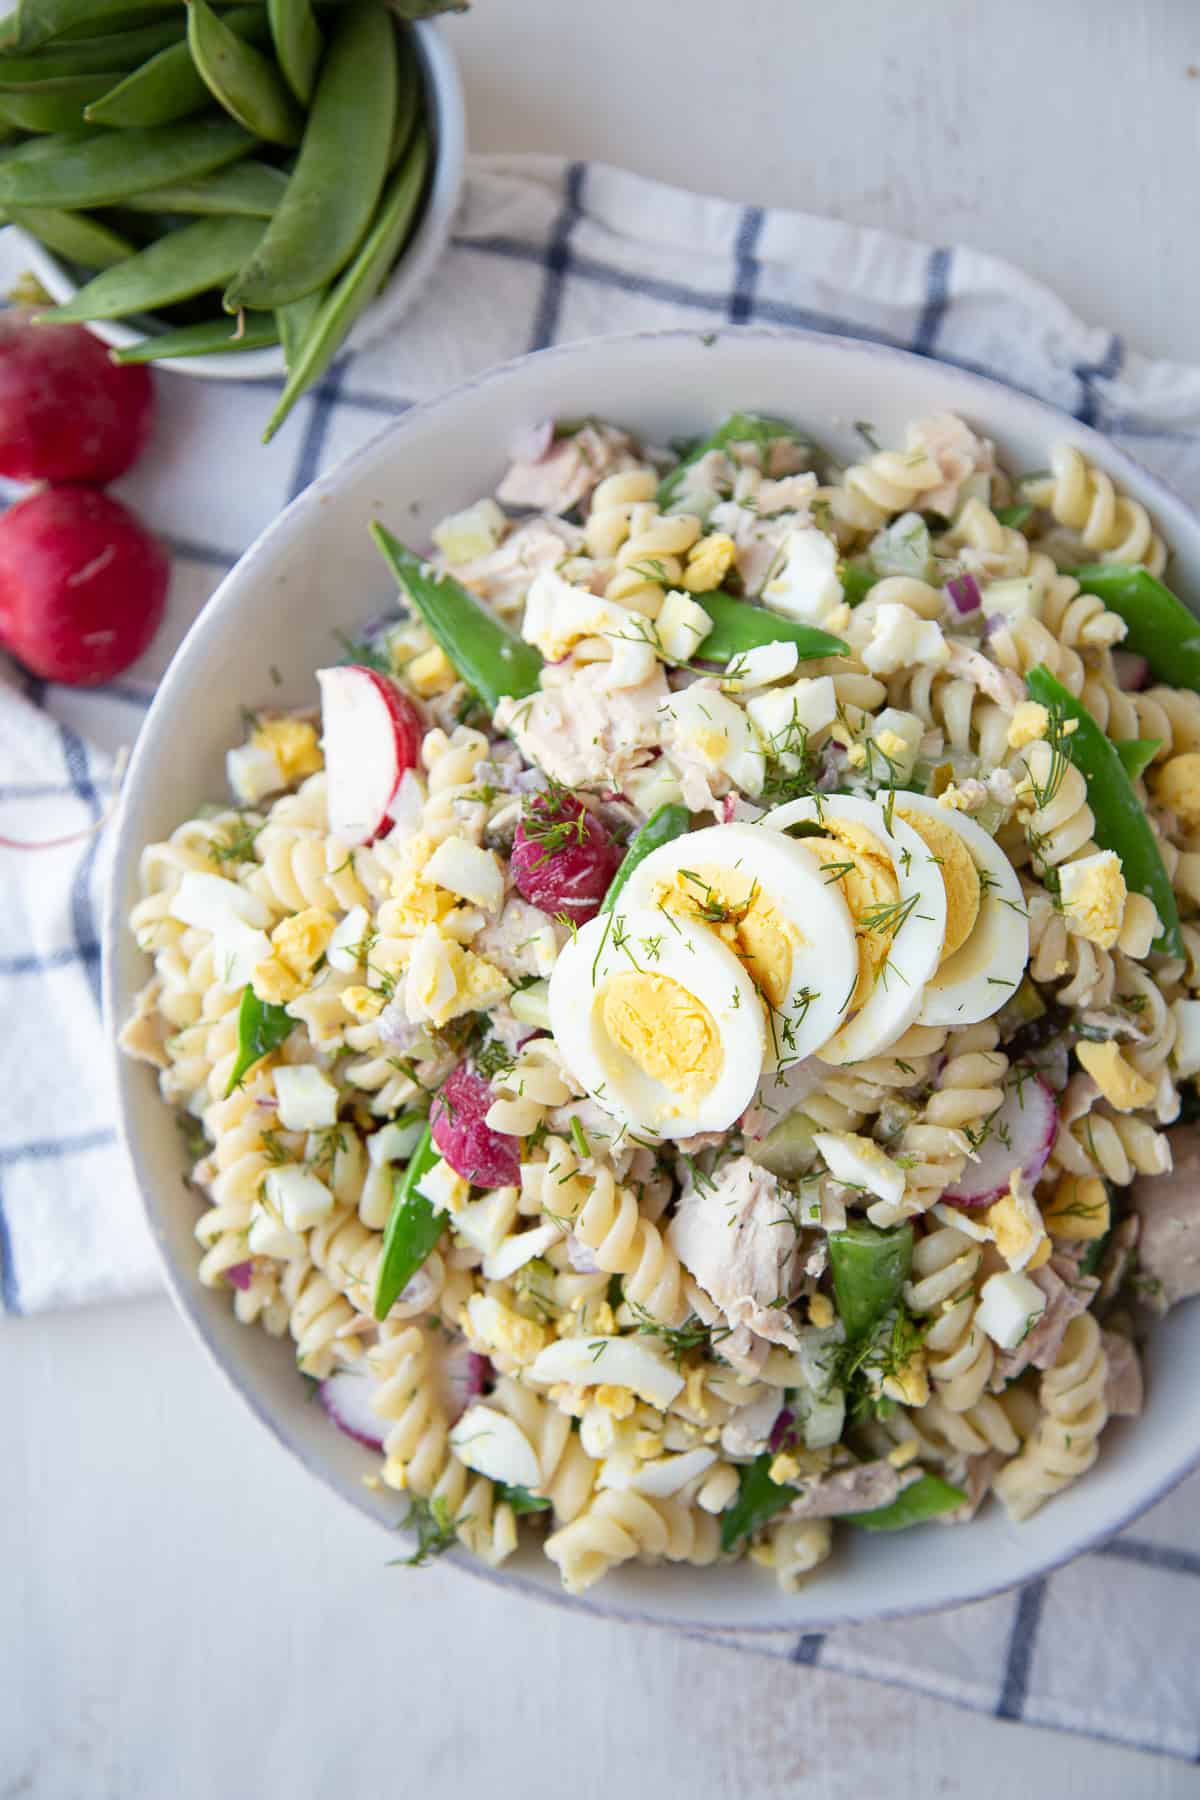 tuna pasta salad topped with hard boiled eggs in a white bowl on a blue and white tea towel.